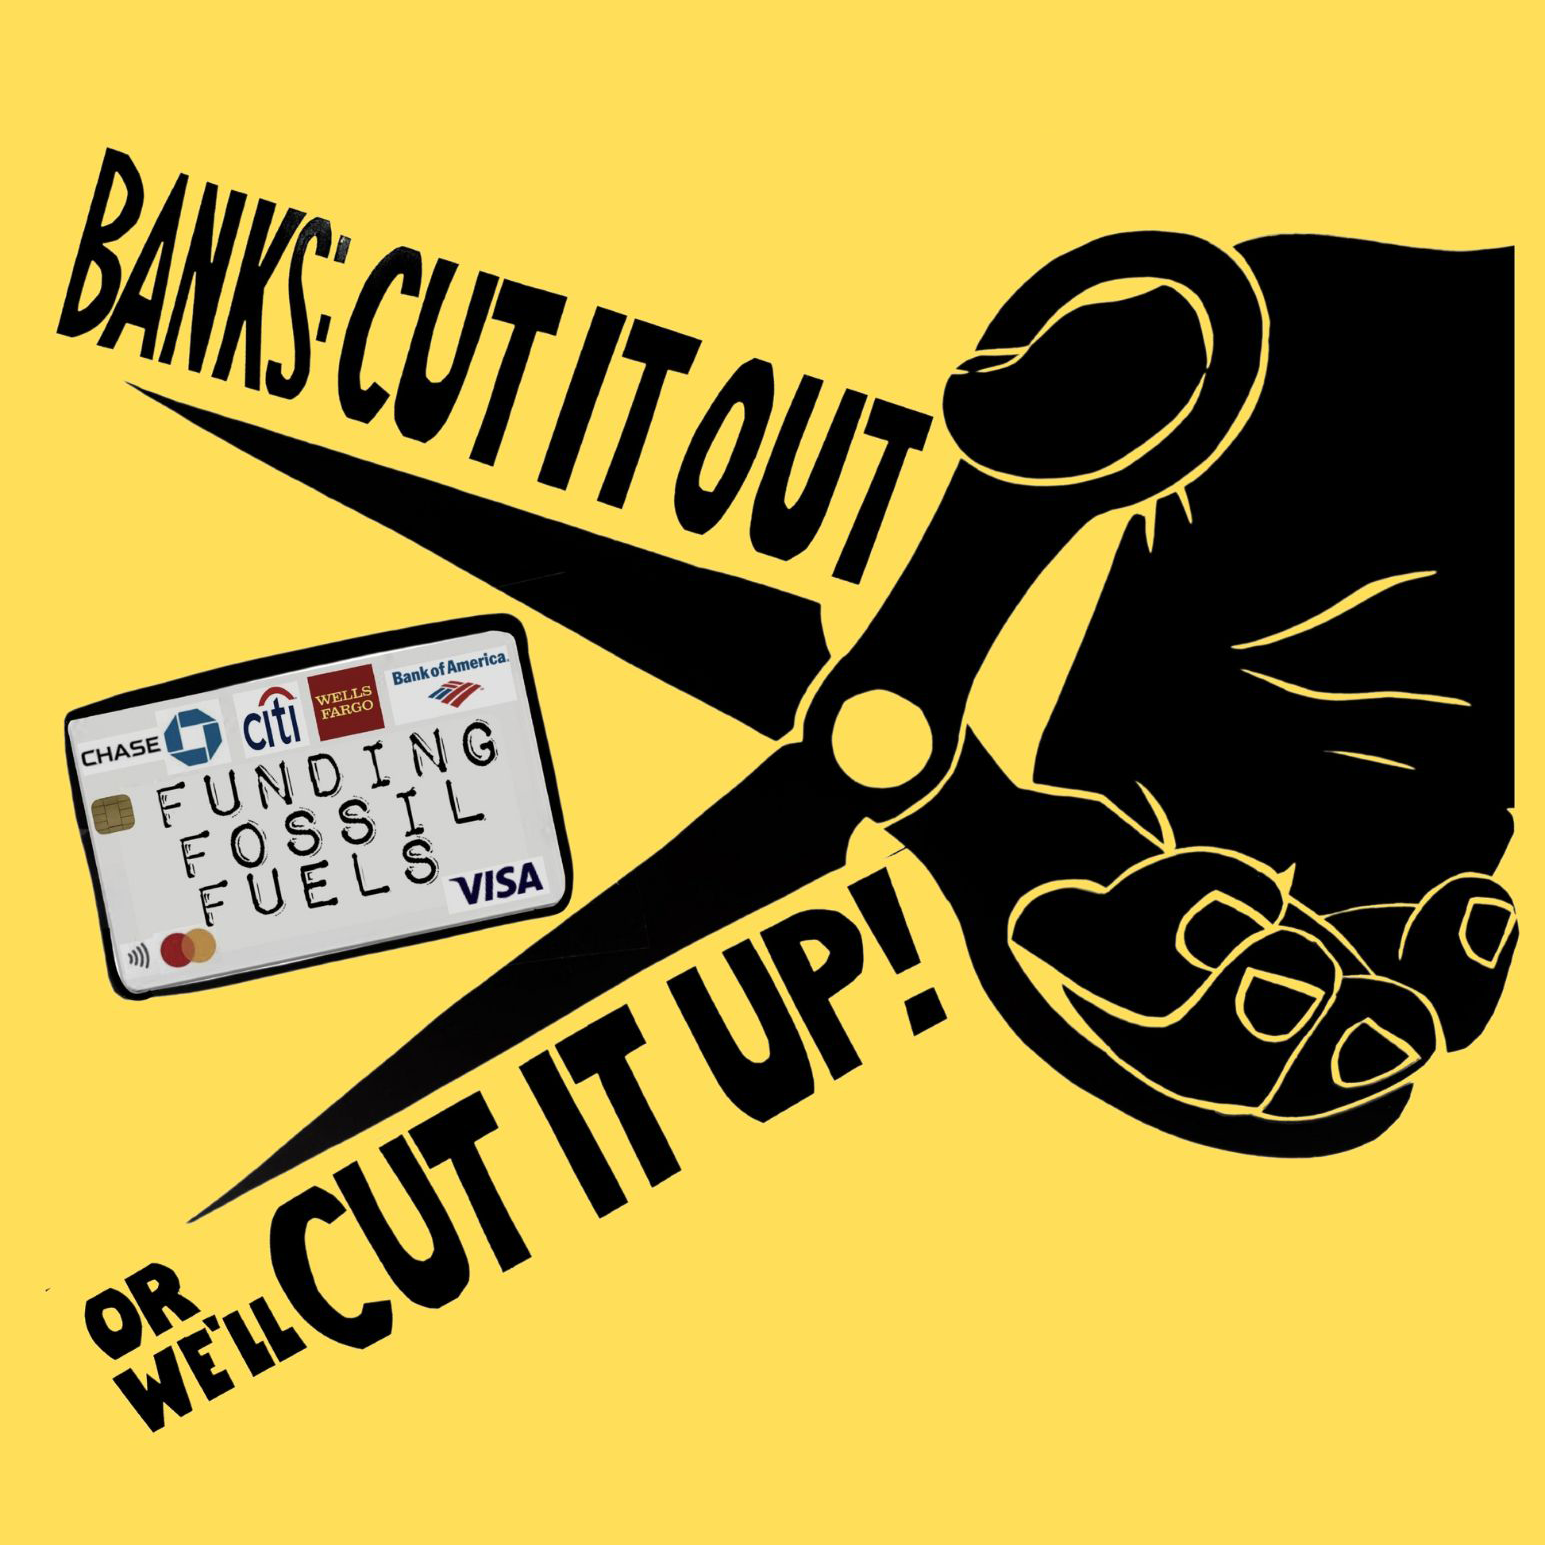 Banks Cut it out, or we'll cut it up!